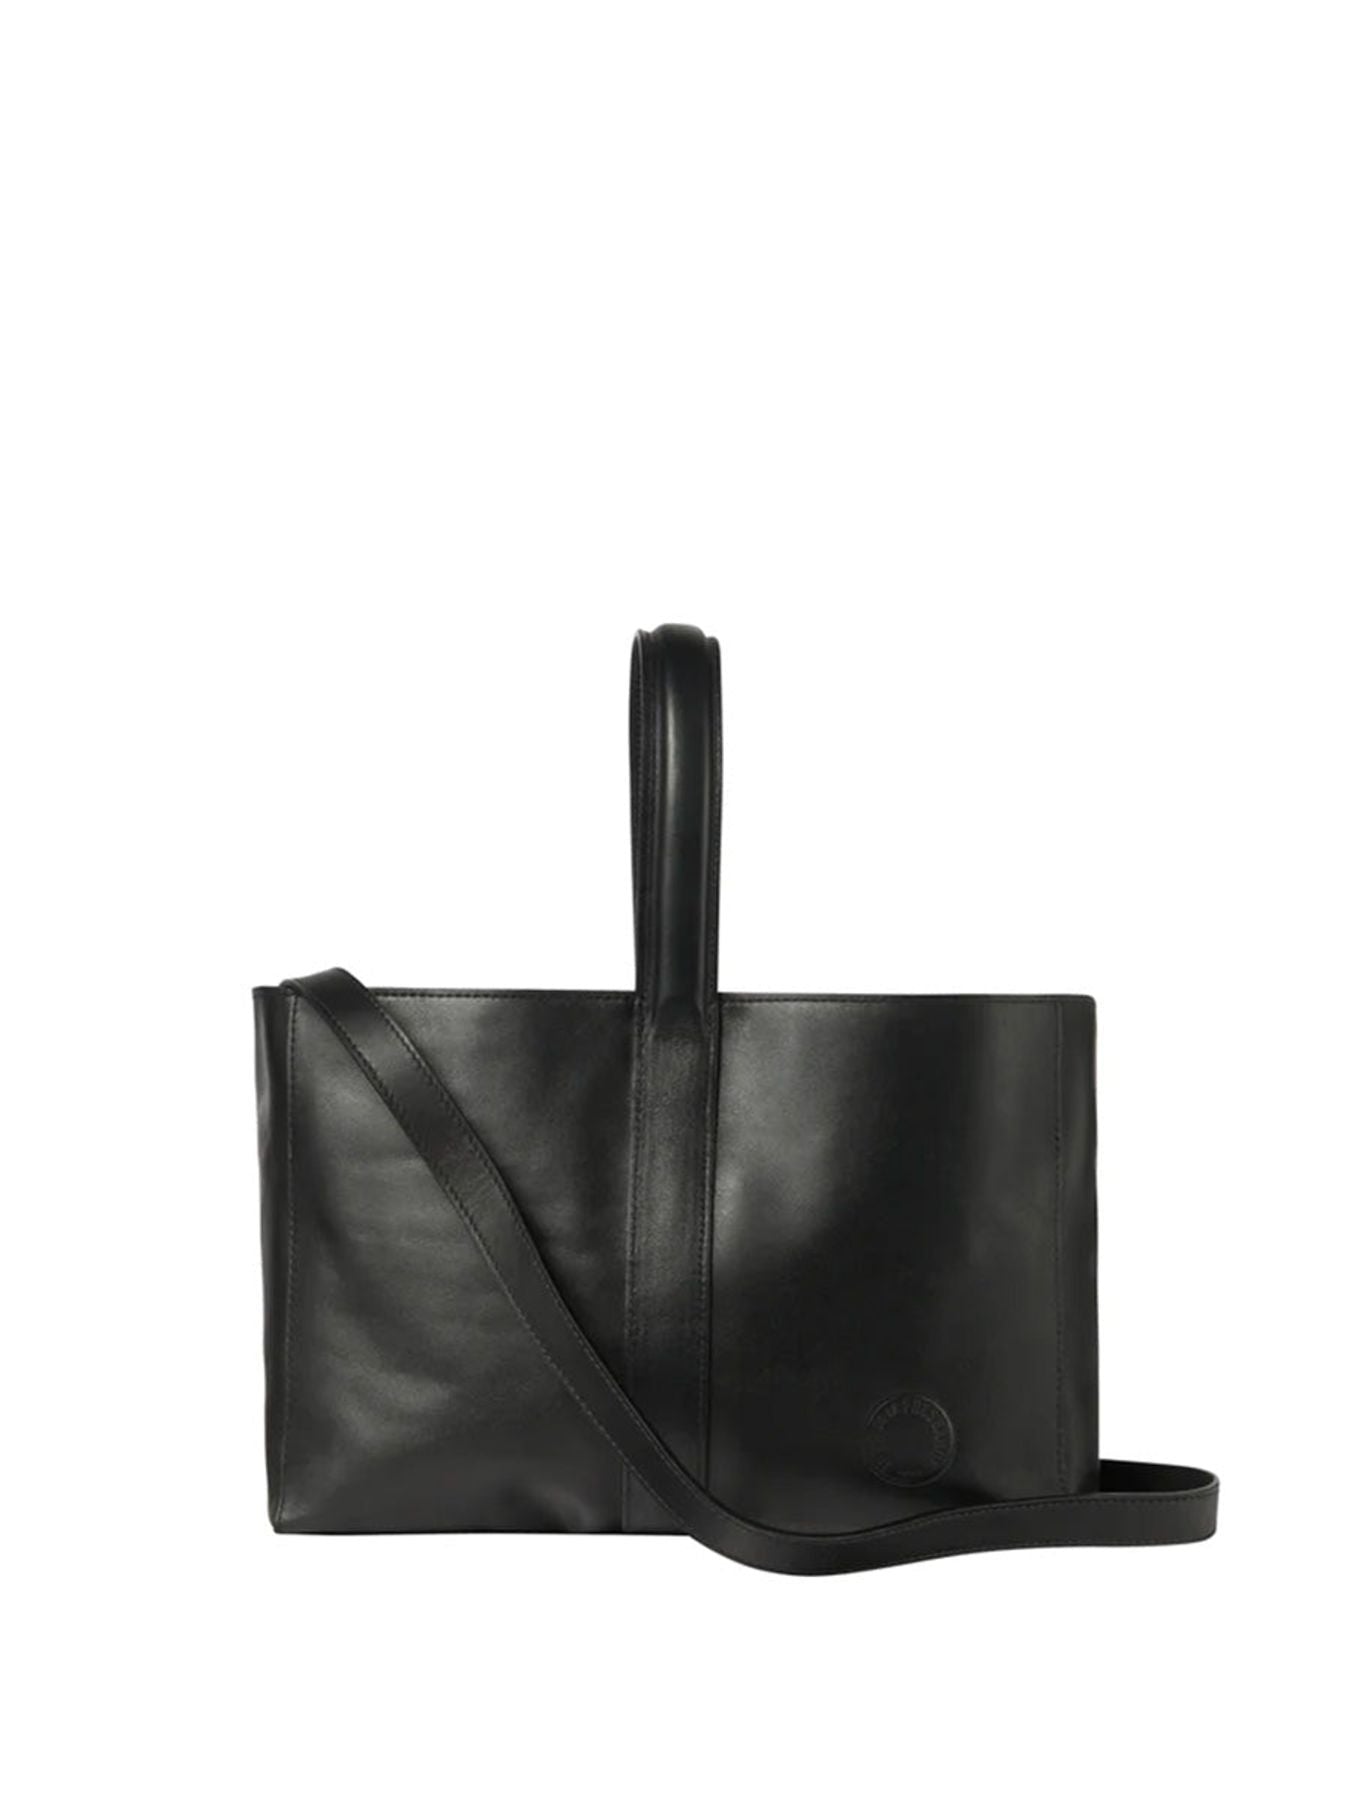 bag-bag-leather-leonore-small-format-black